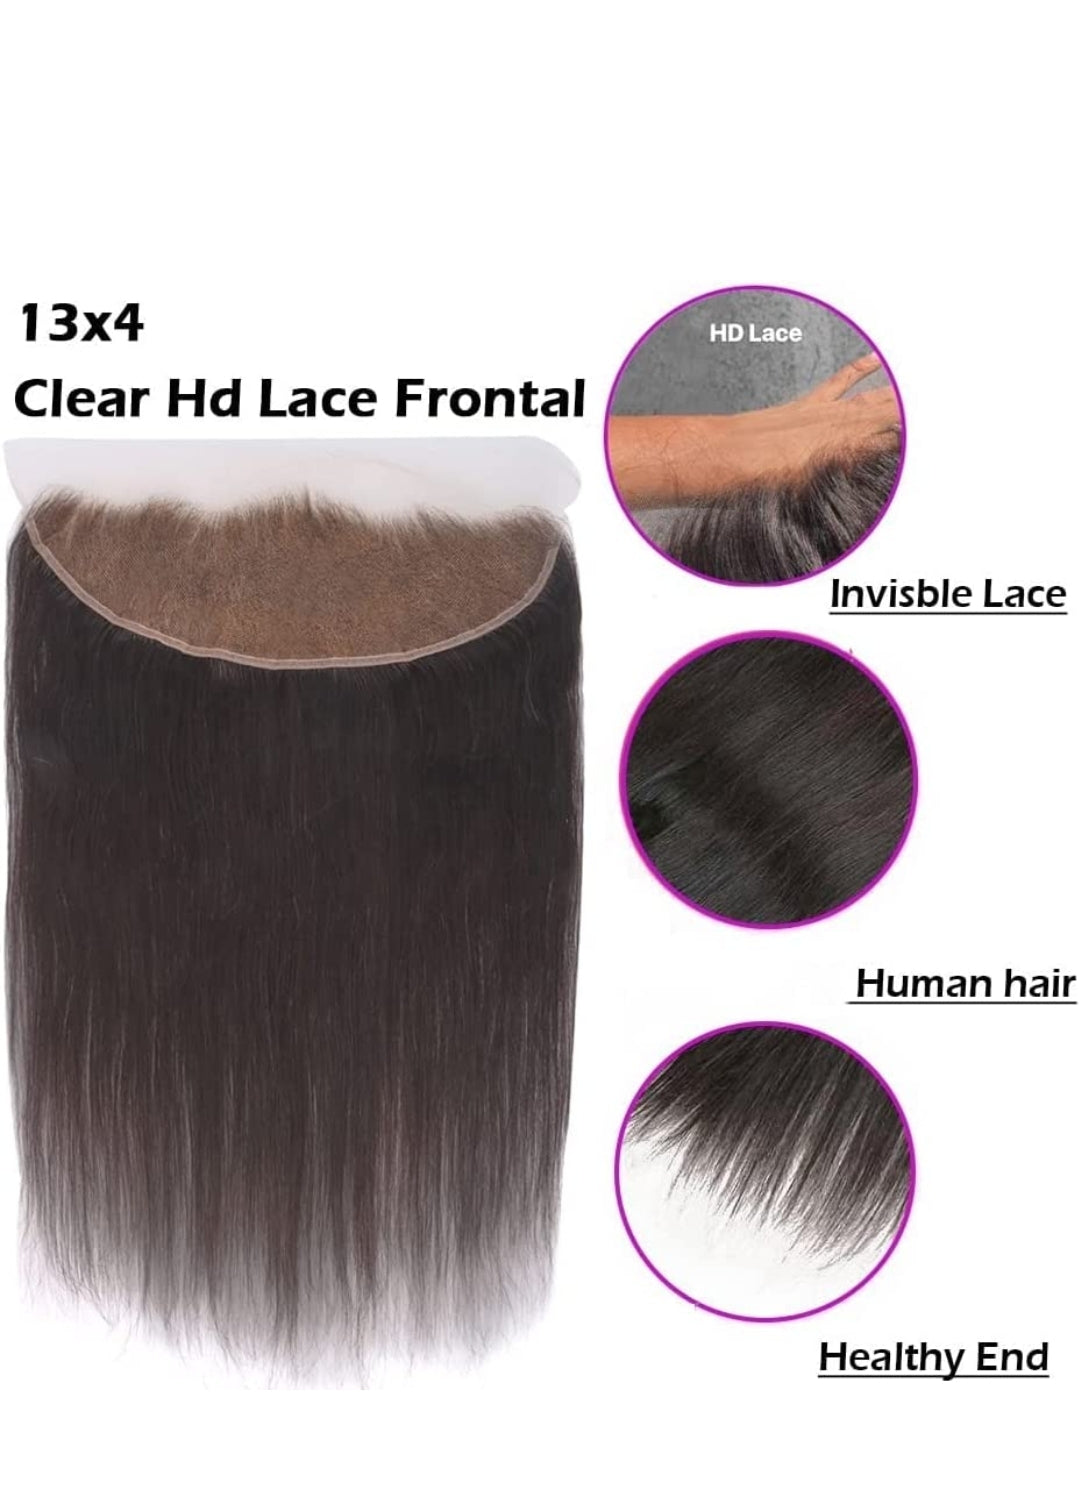 HD Lace Curly Frontal